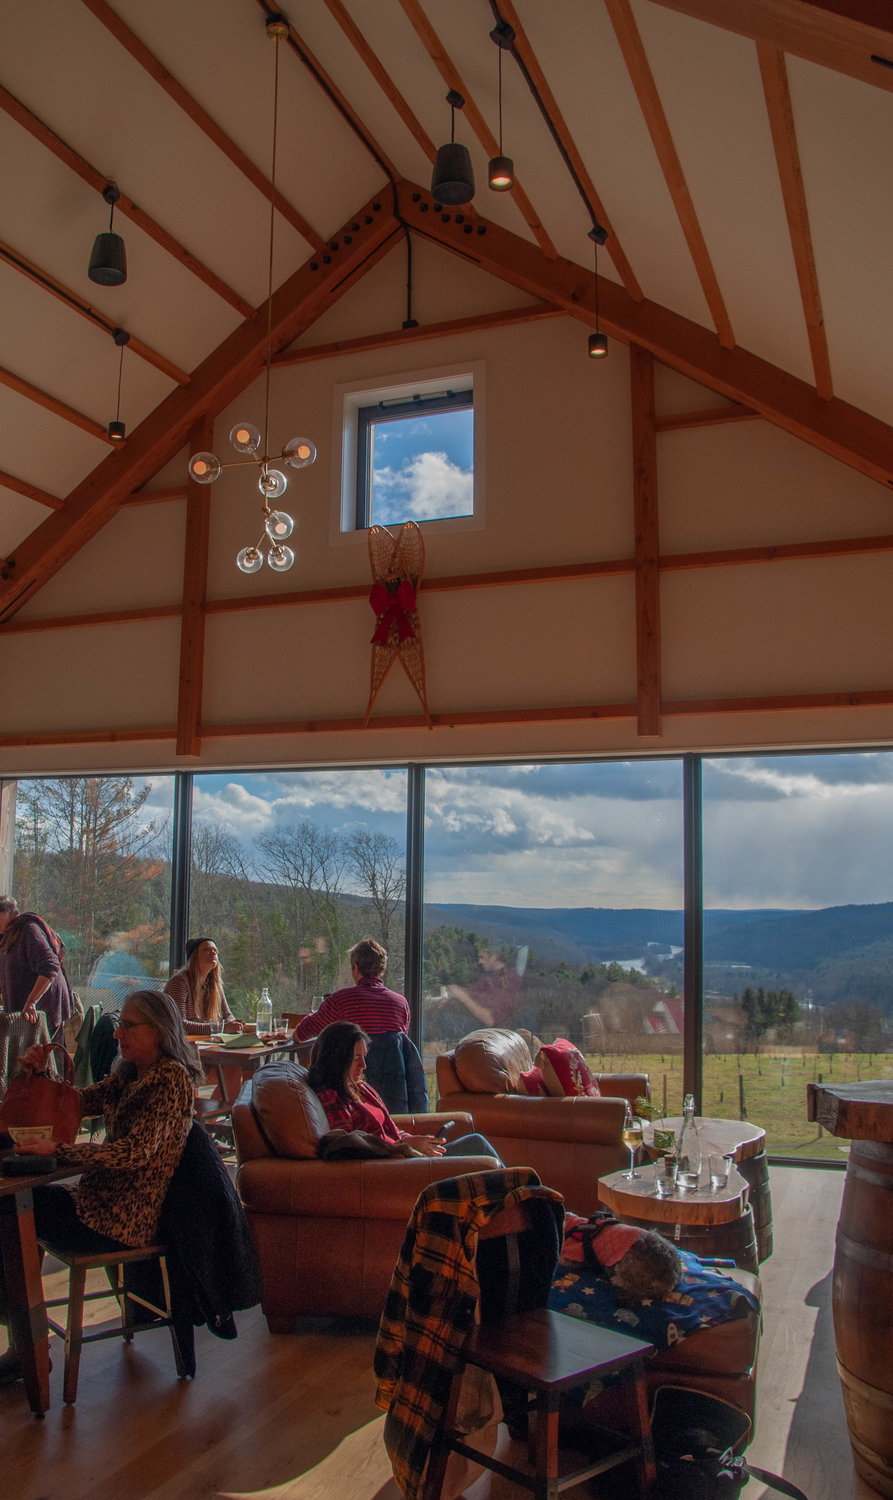 The Tasting Room at Seminary Hill is a full-service restaurant serving seasonal, farm-to-table dishes, and the view is out of this world.